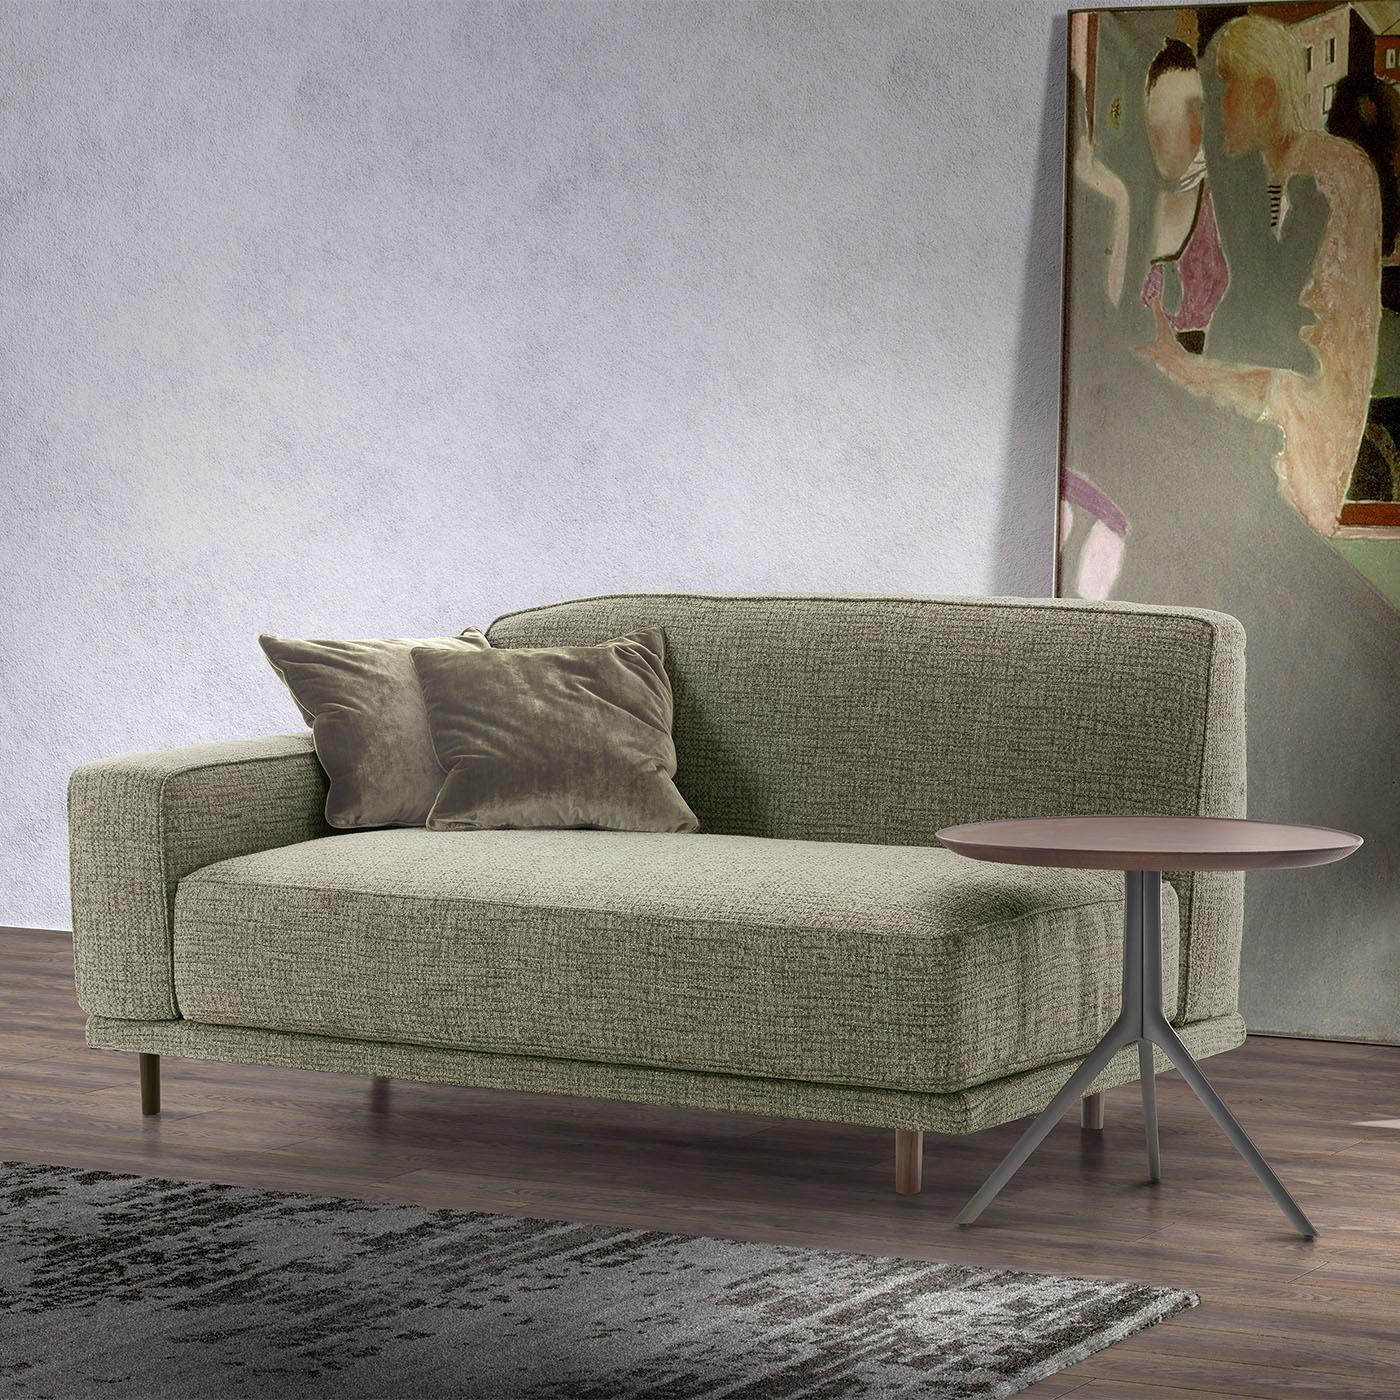 Designed by Marco Corti, this sofa boasts a wooden frame complemented by solid walnut canaletto details, adding a touch of sophistication to its sleek design. The cushions, armrests, and backrests are upholstered can be customized with leather, faux